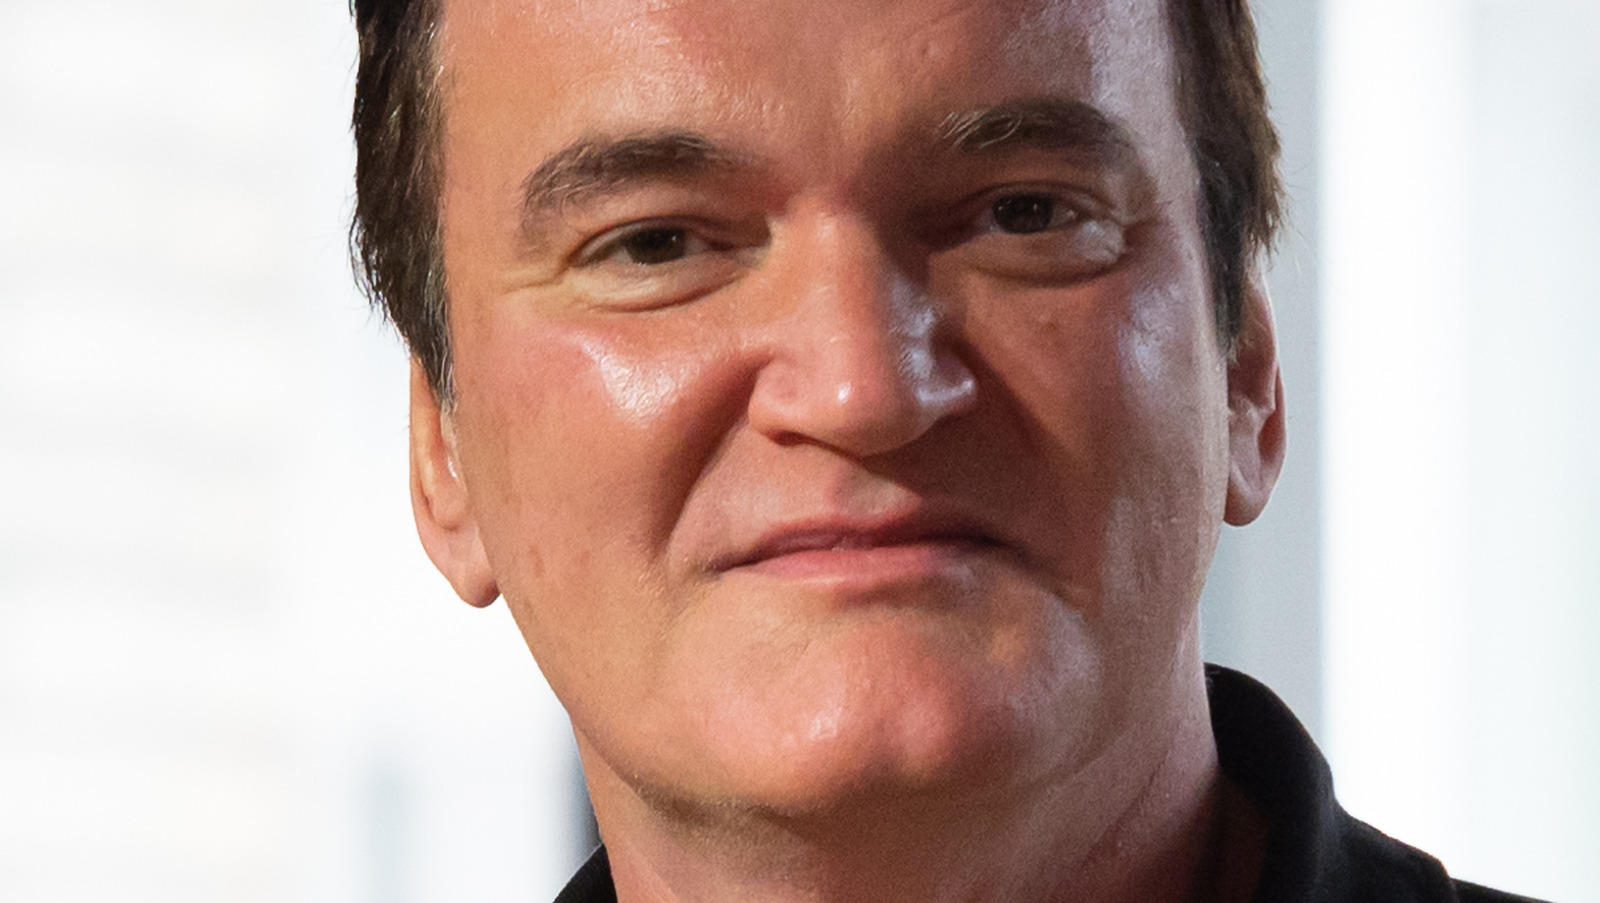 Quentin Tarantino Watches 'A Lot Of Peppa Pig' With His Son – Exclusive